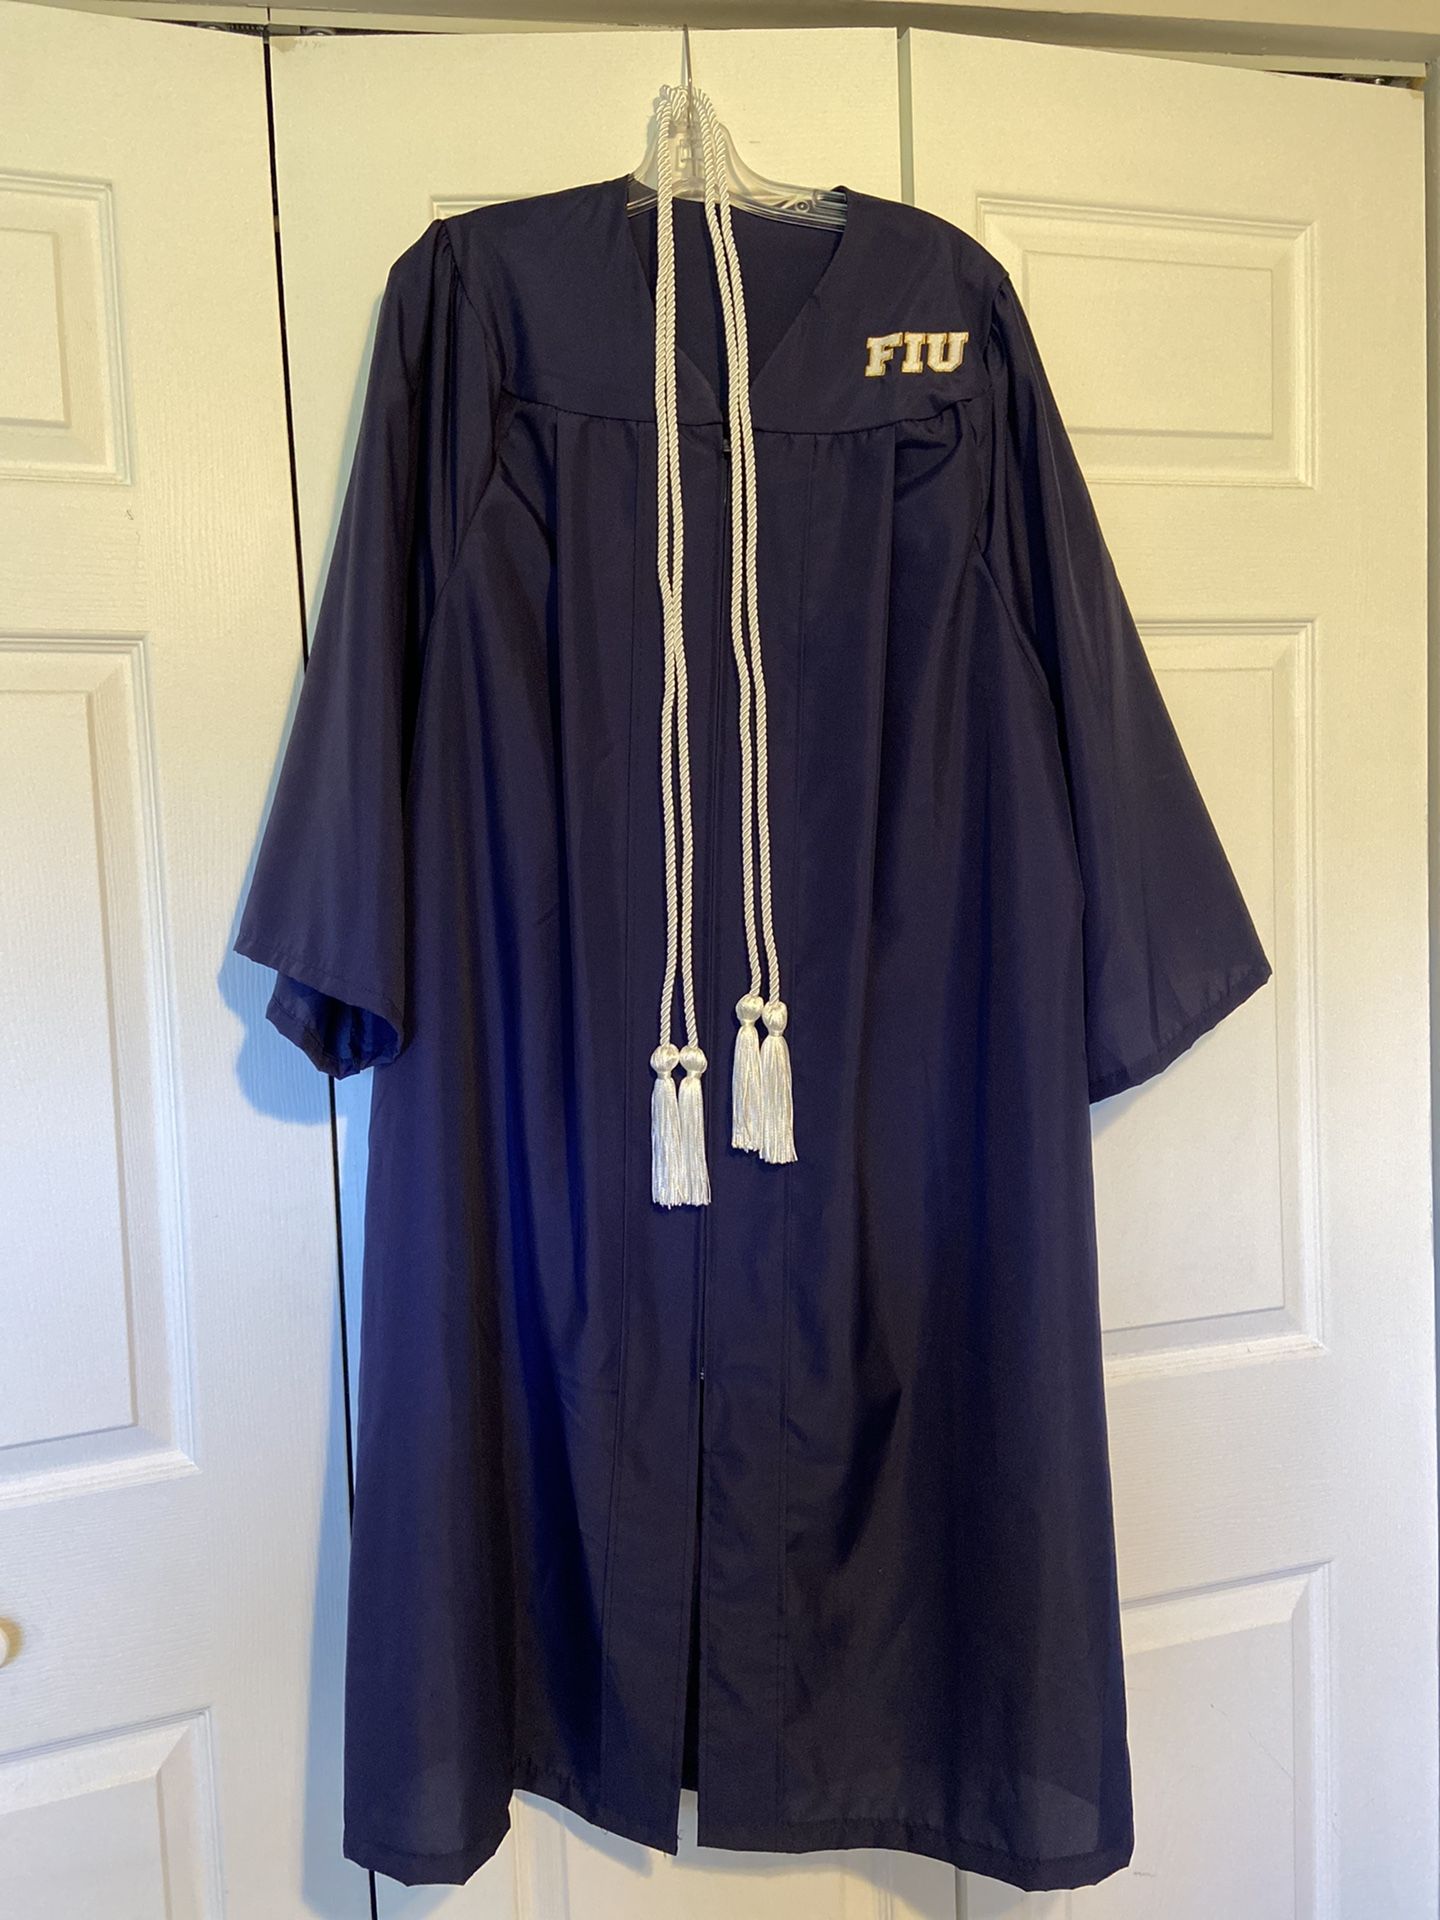 FIU Graduation Gown And Tassle